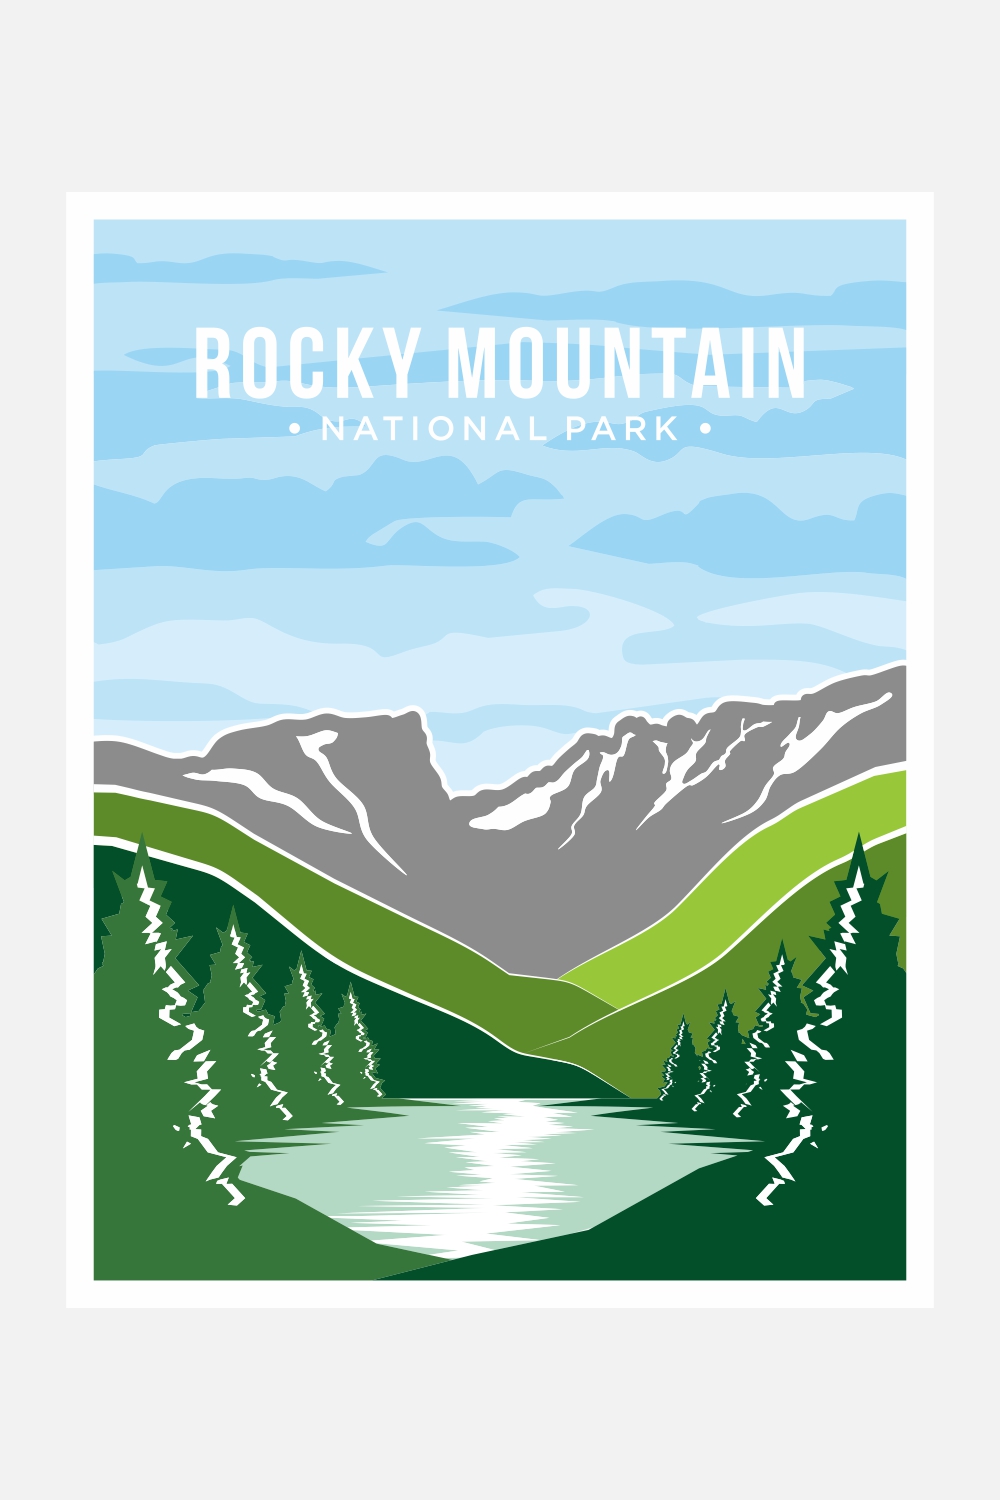 Rocky Mountain National Park Poster Vector Illustration – Only $8 pinterest preview image.